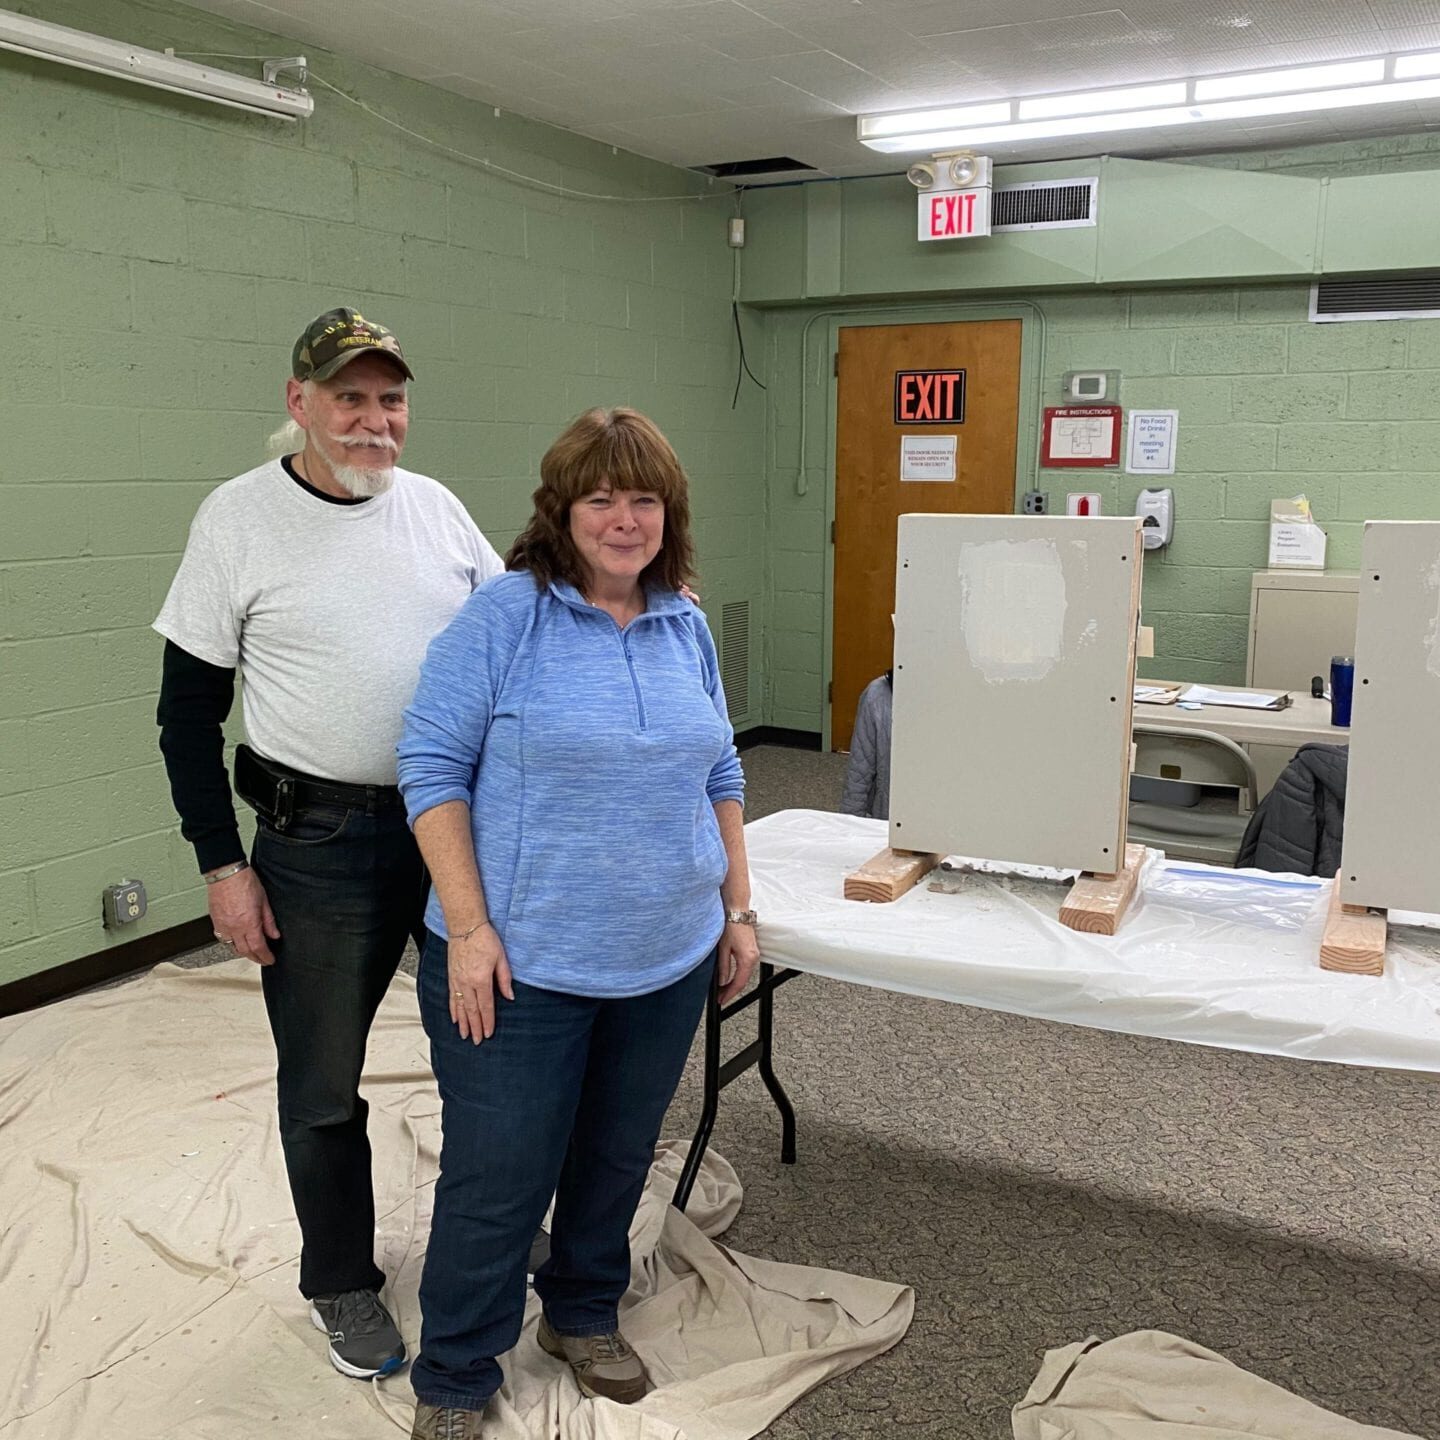 A man and woman standing next to a table in a room.